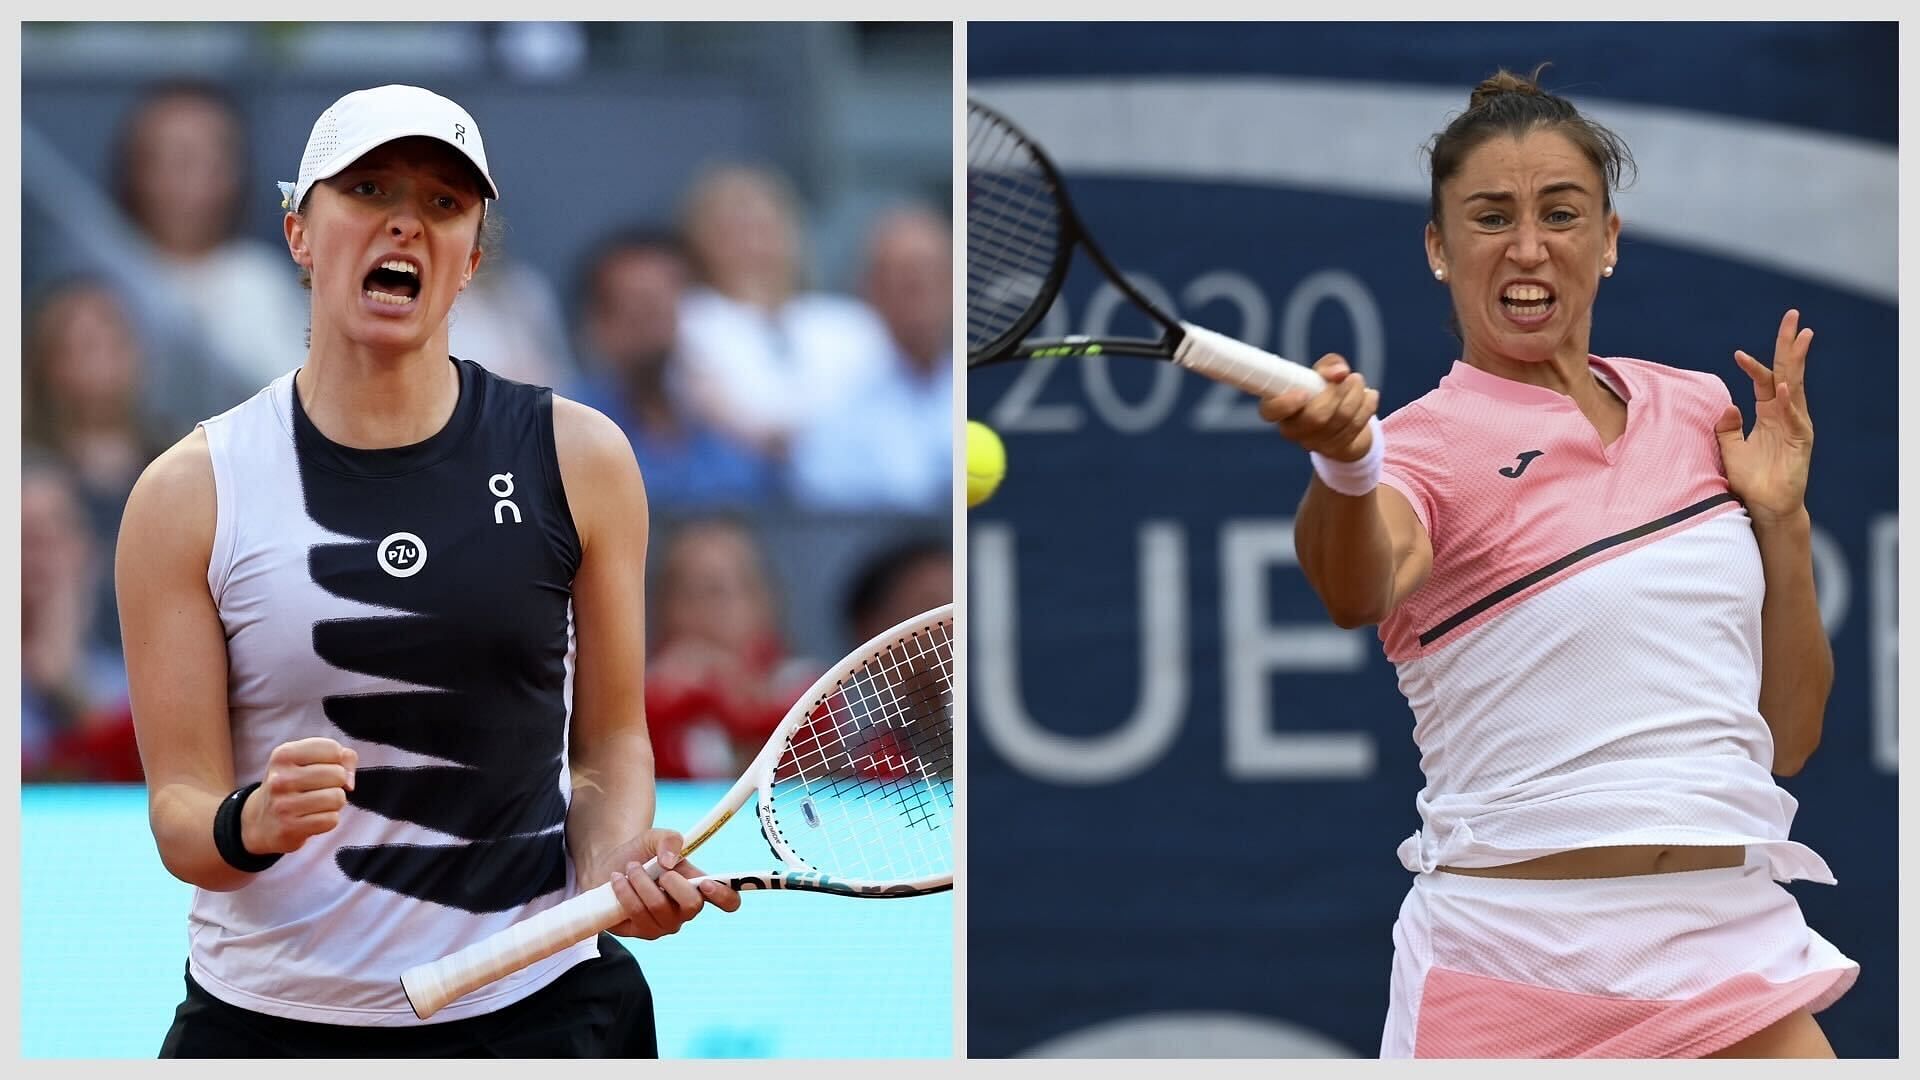 Iga Swiatek vs Sara Sorribes Tormo is one of the first-round matches at the 2023 China Open.